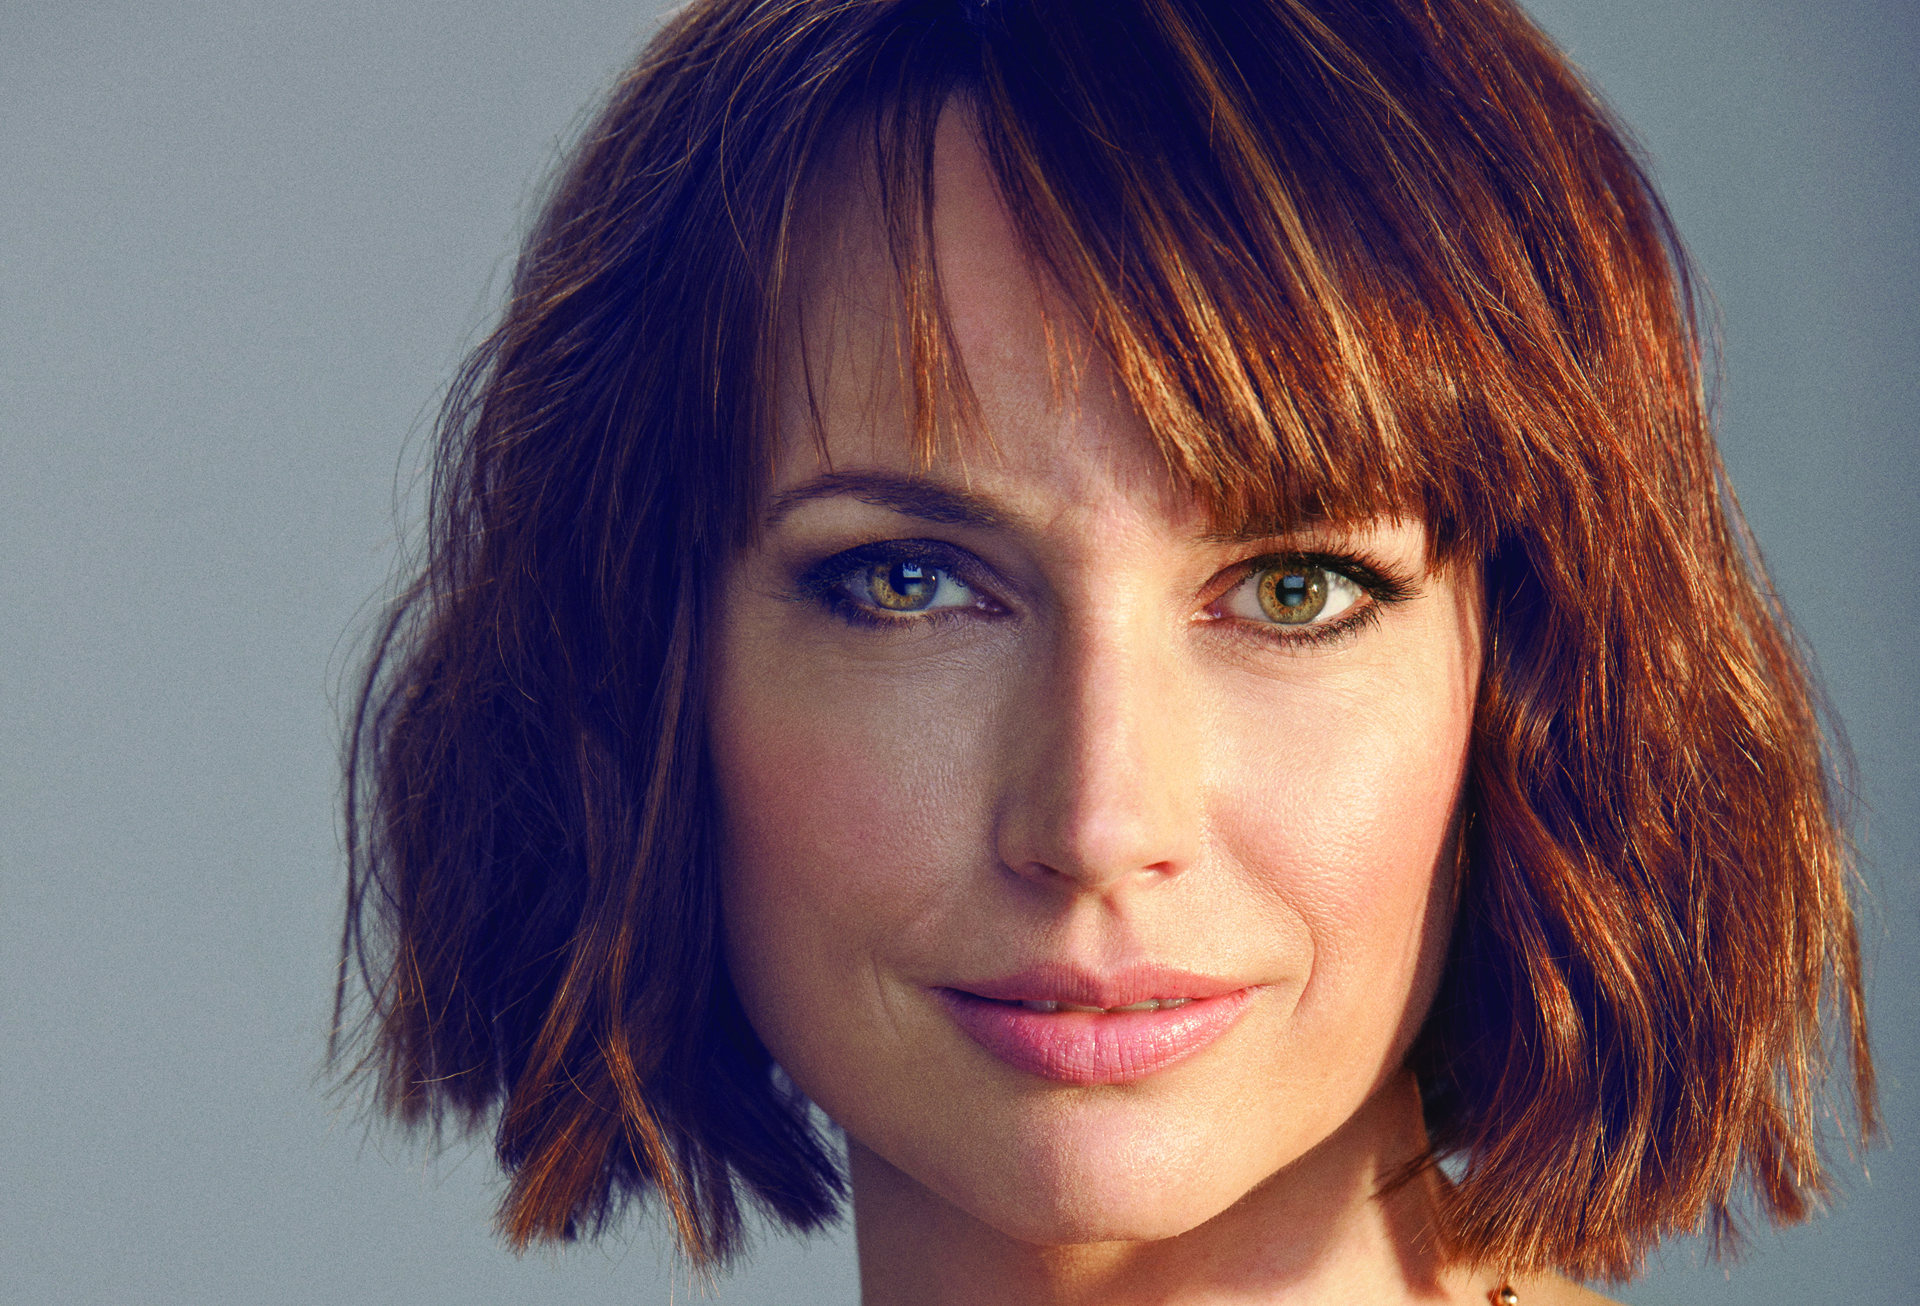 Julie Ann Emery Wallpaper Image Photos Pictures Background